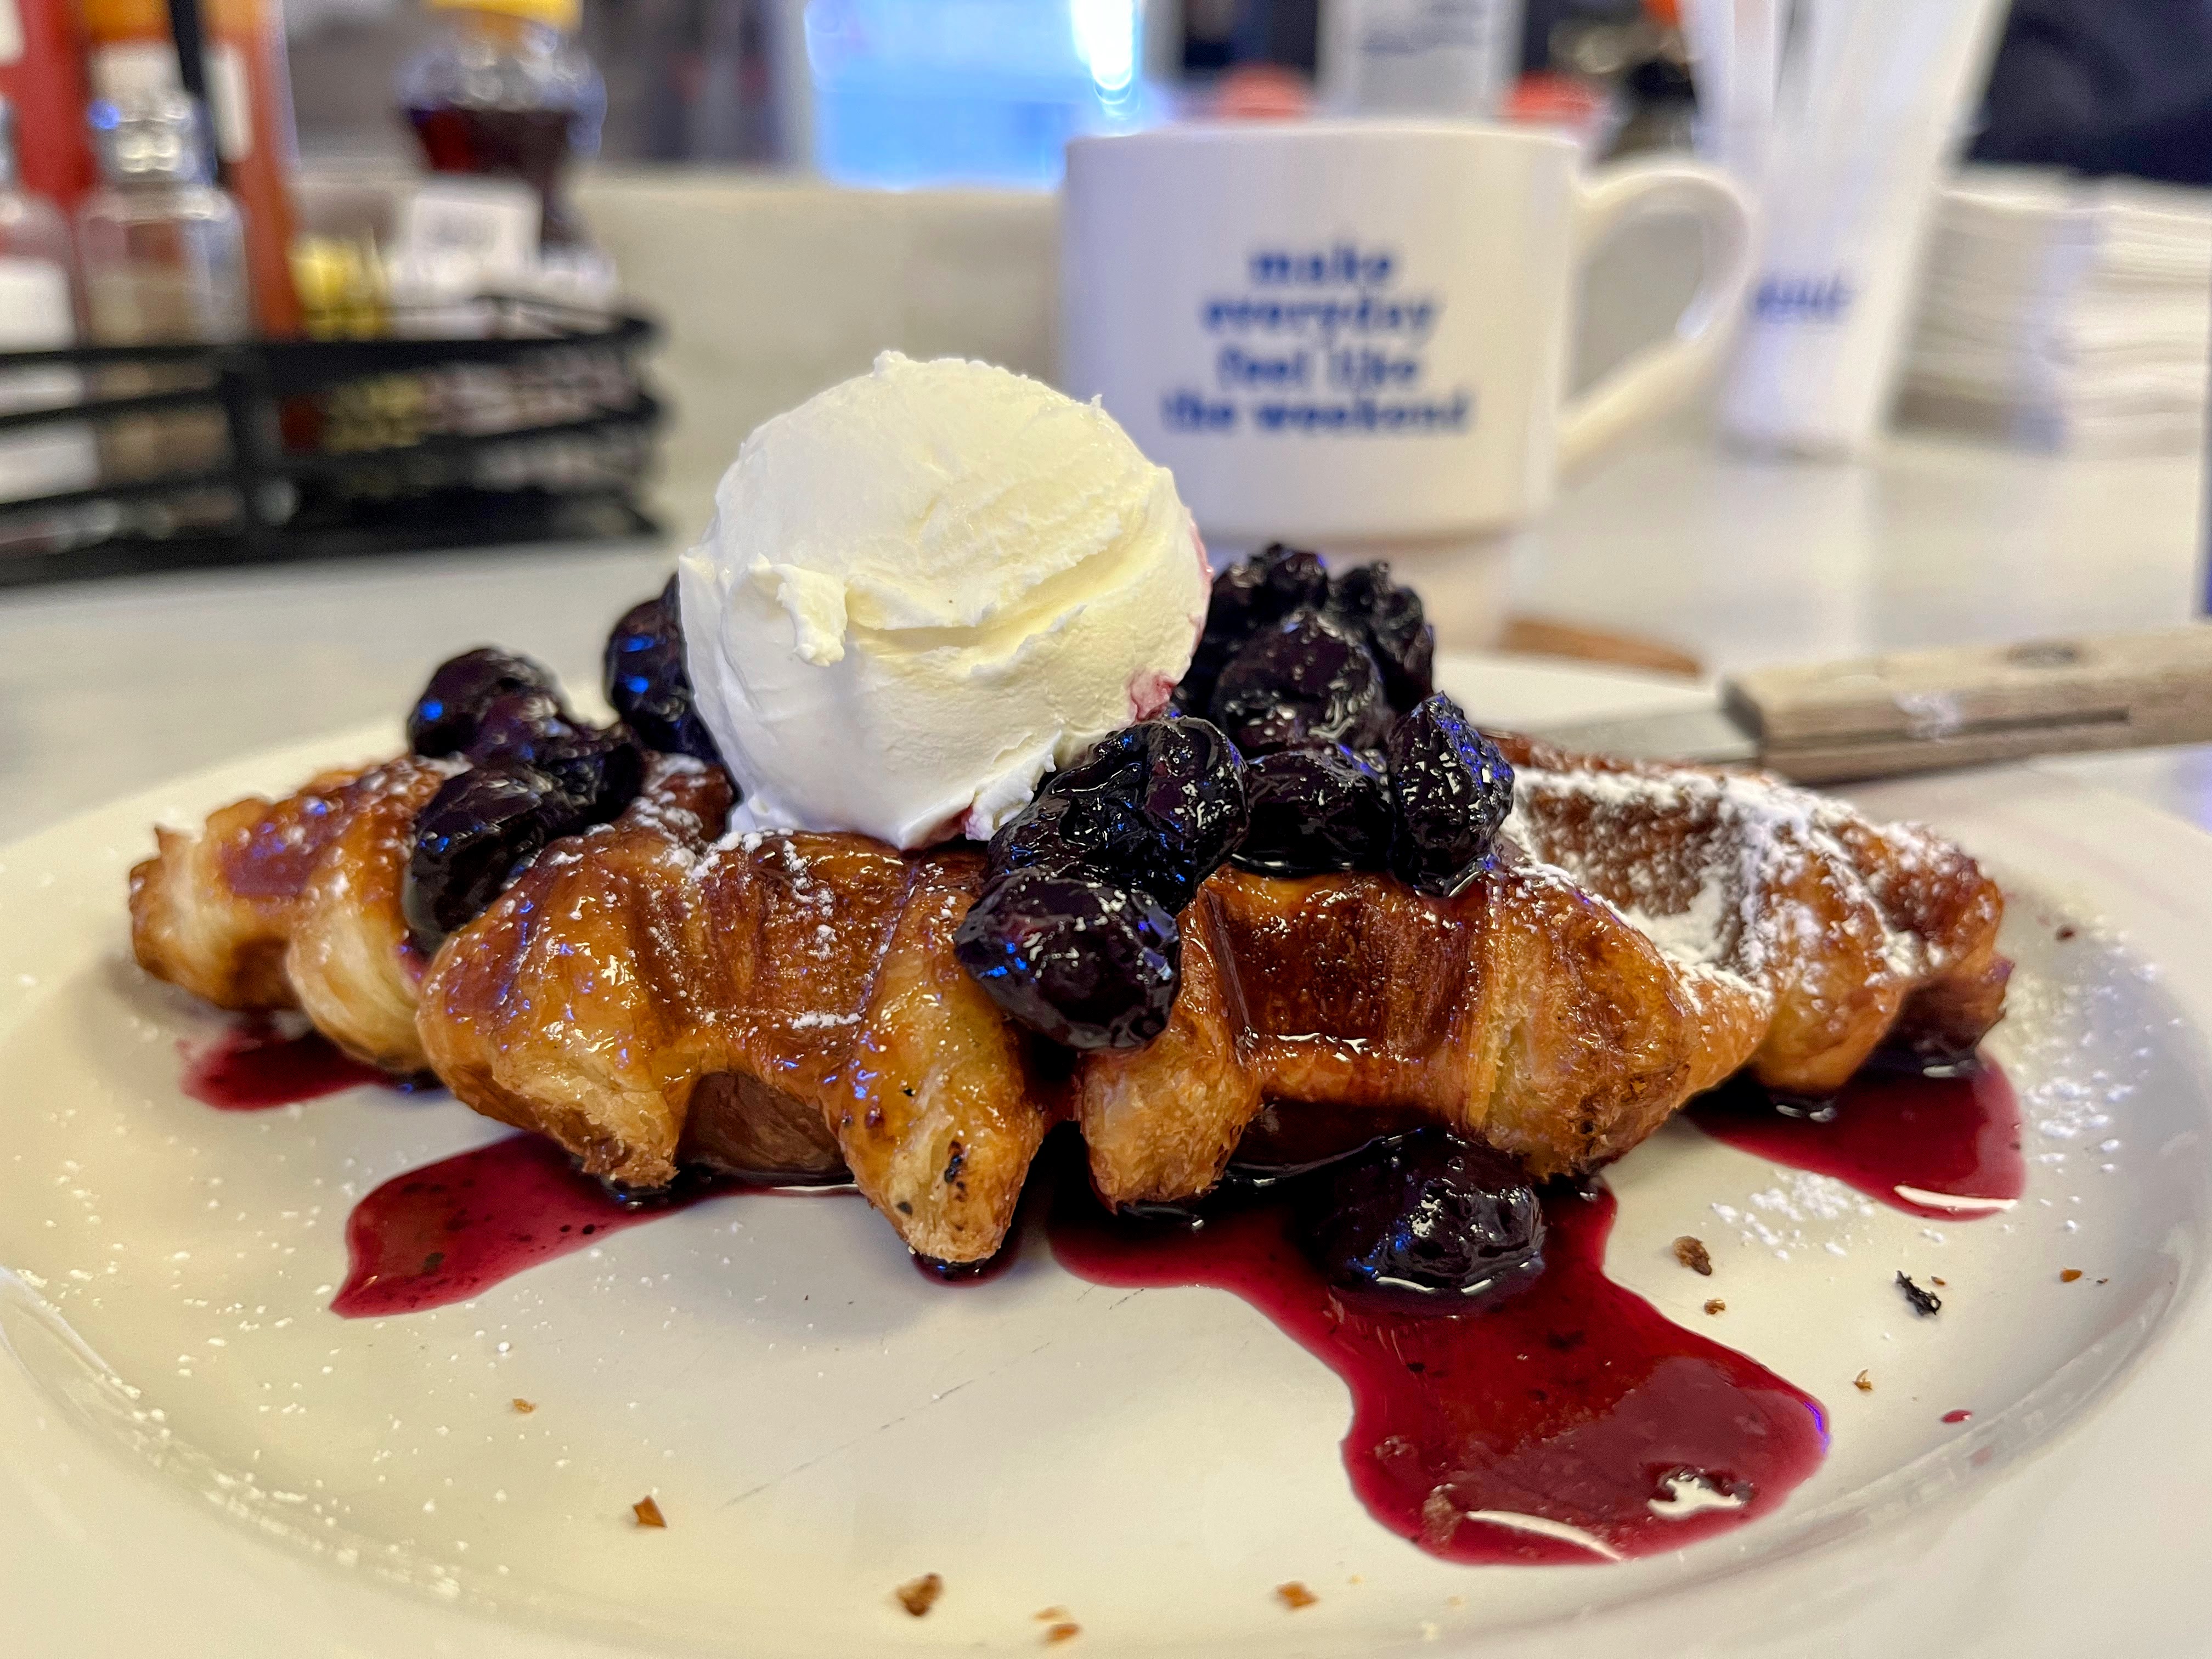 A croissant pressed into a waffle shape is drizzled in blueberry jam and a scoop of whipped cream.